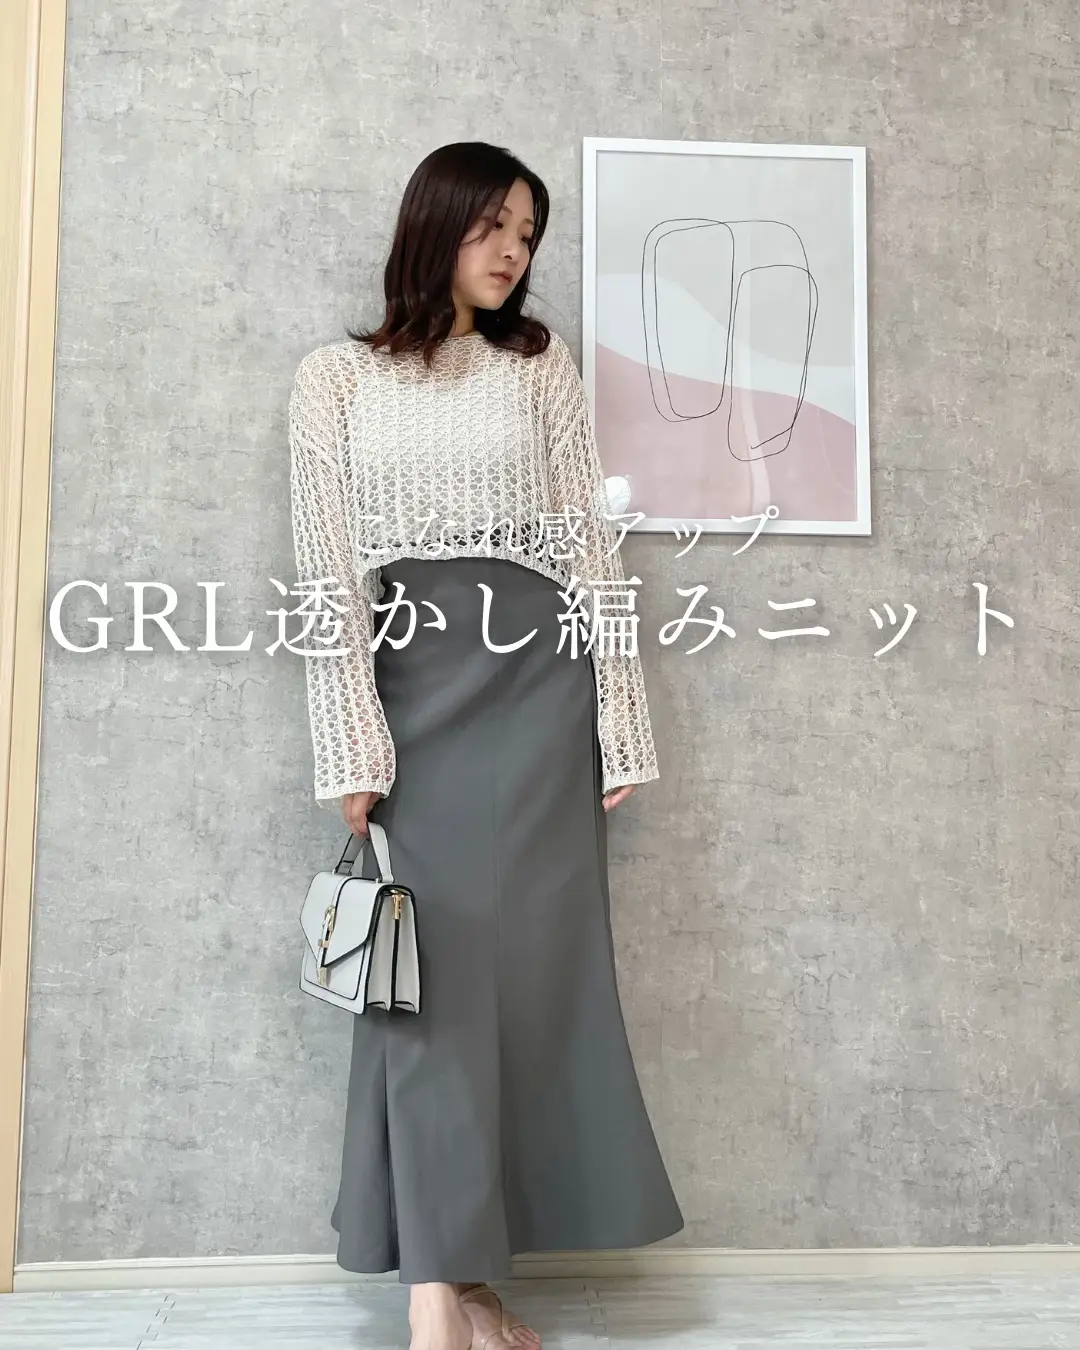 Comfortable    GRL Openwork Knit   | Gallery posted by ときみつ